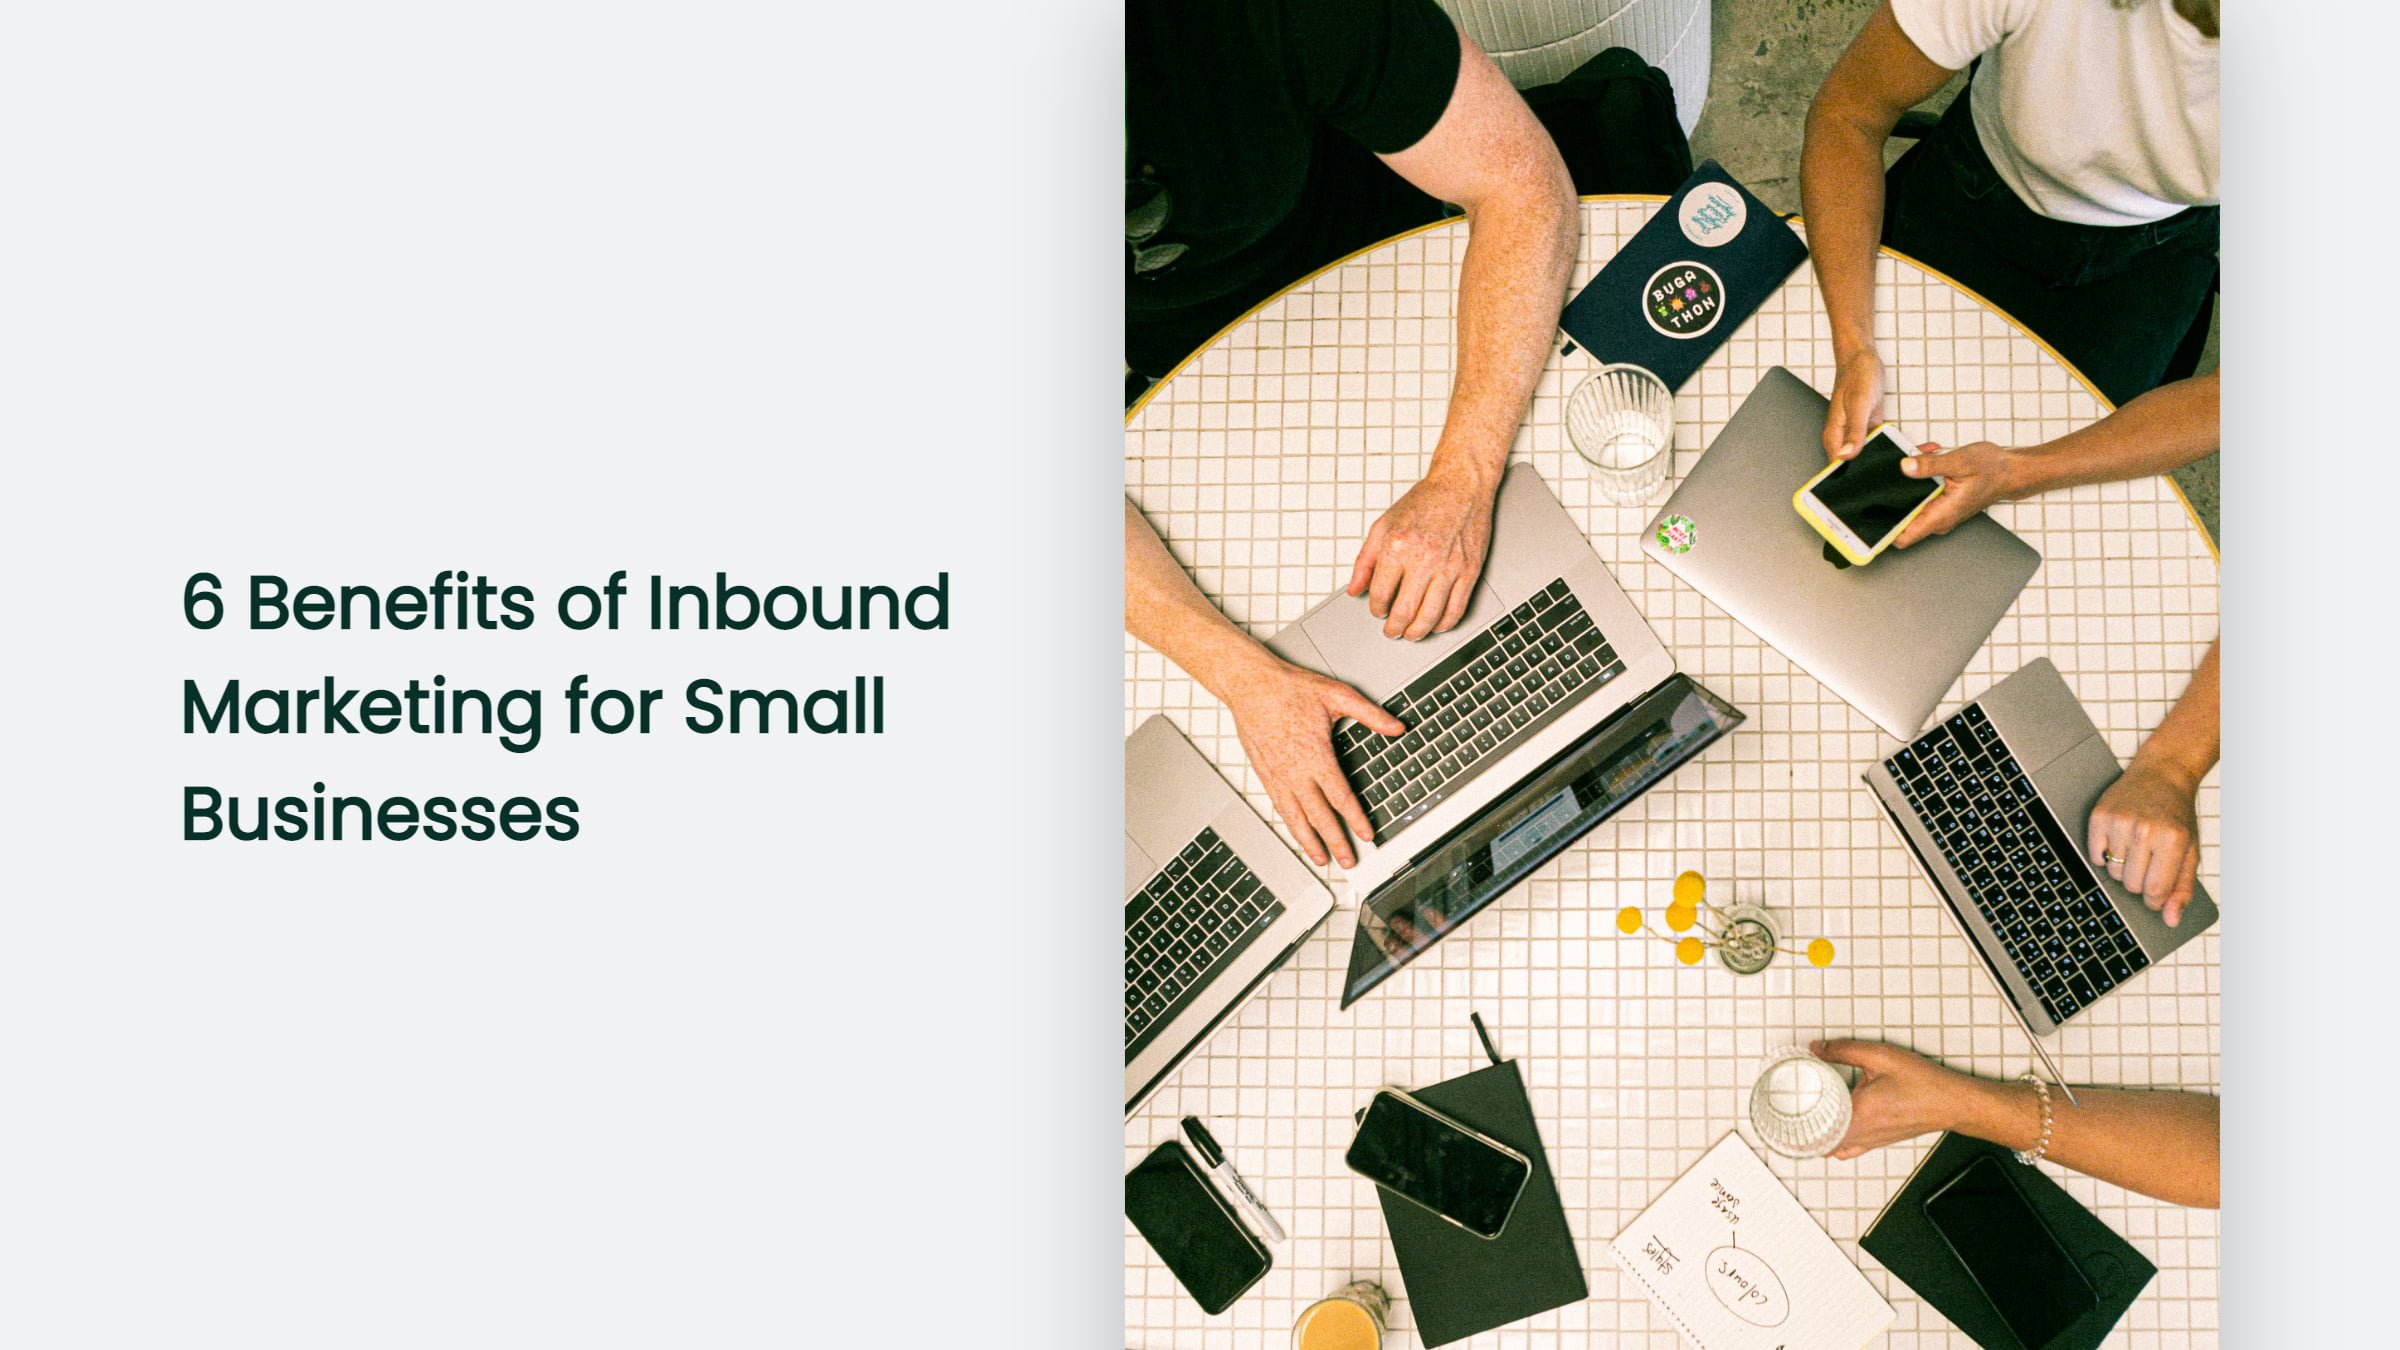 6 Benefits Of Inbound Marketing For Small Businesses Inbound Marketing For Small Businesses